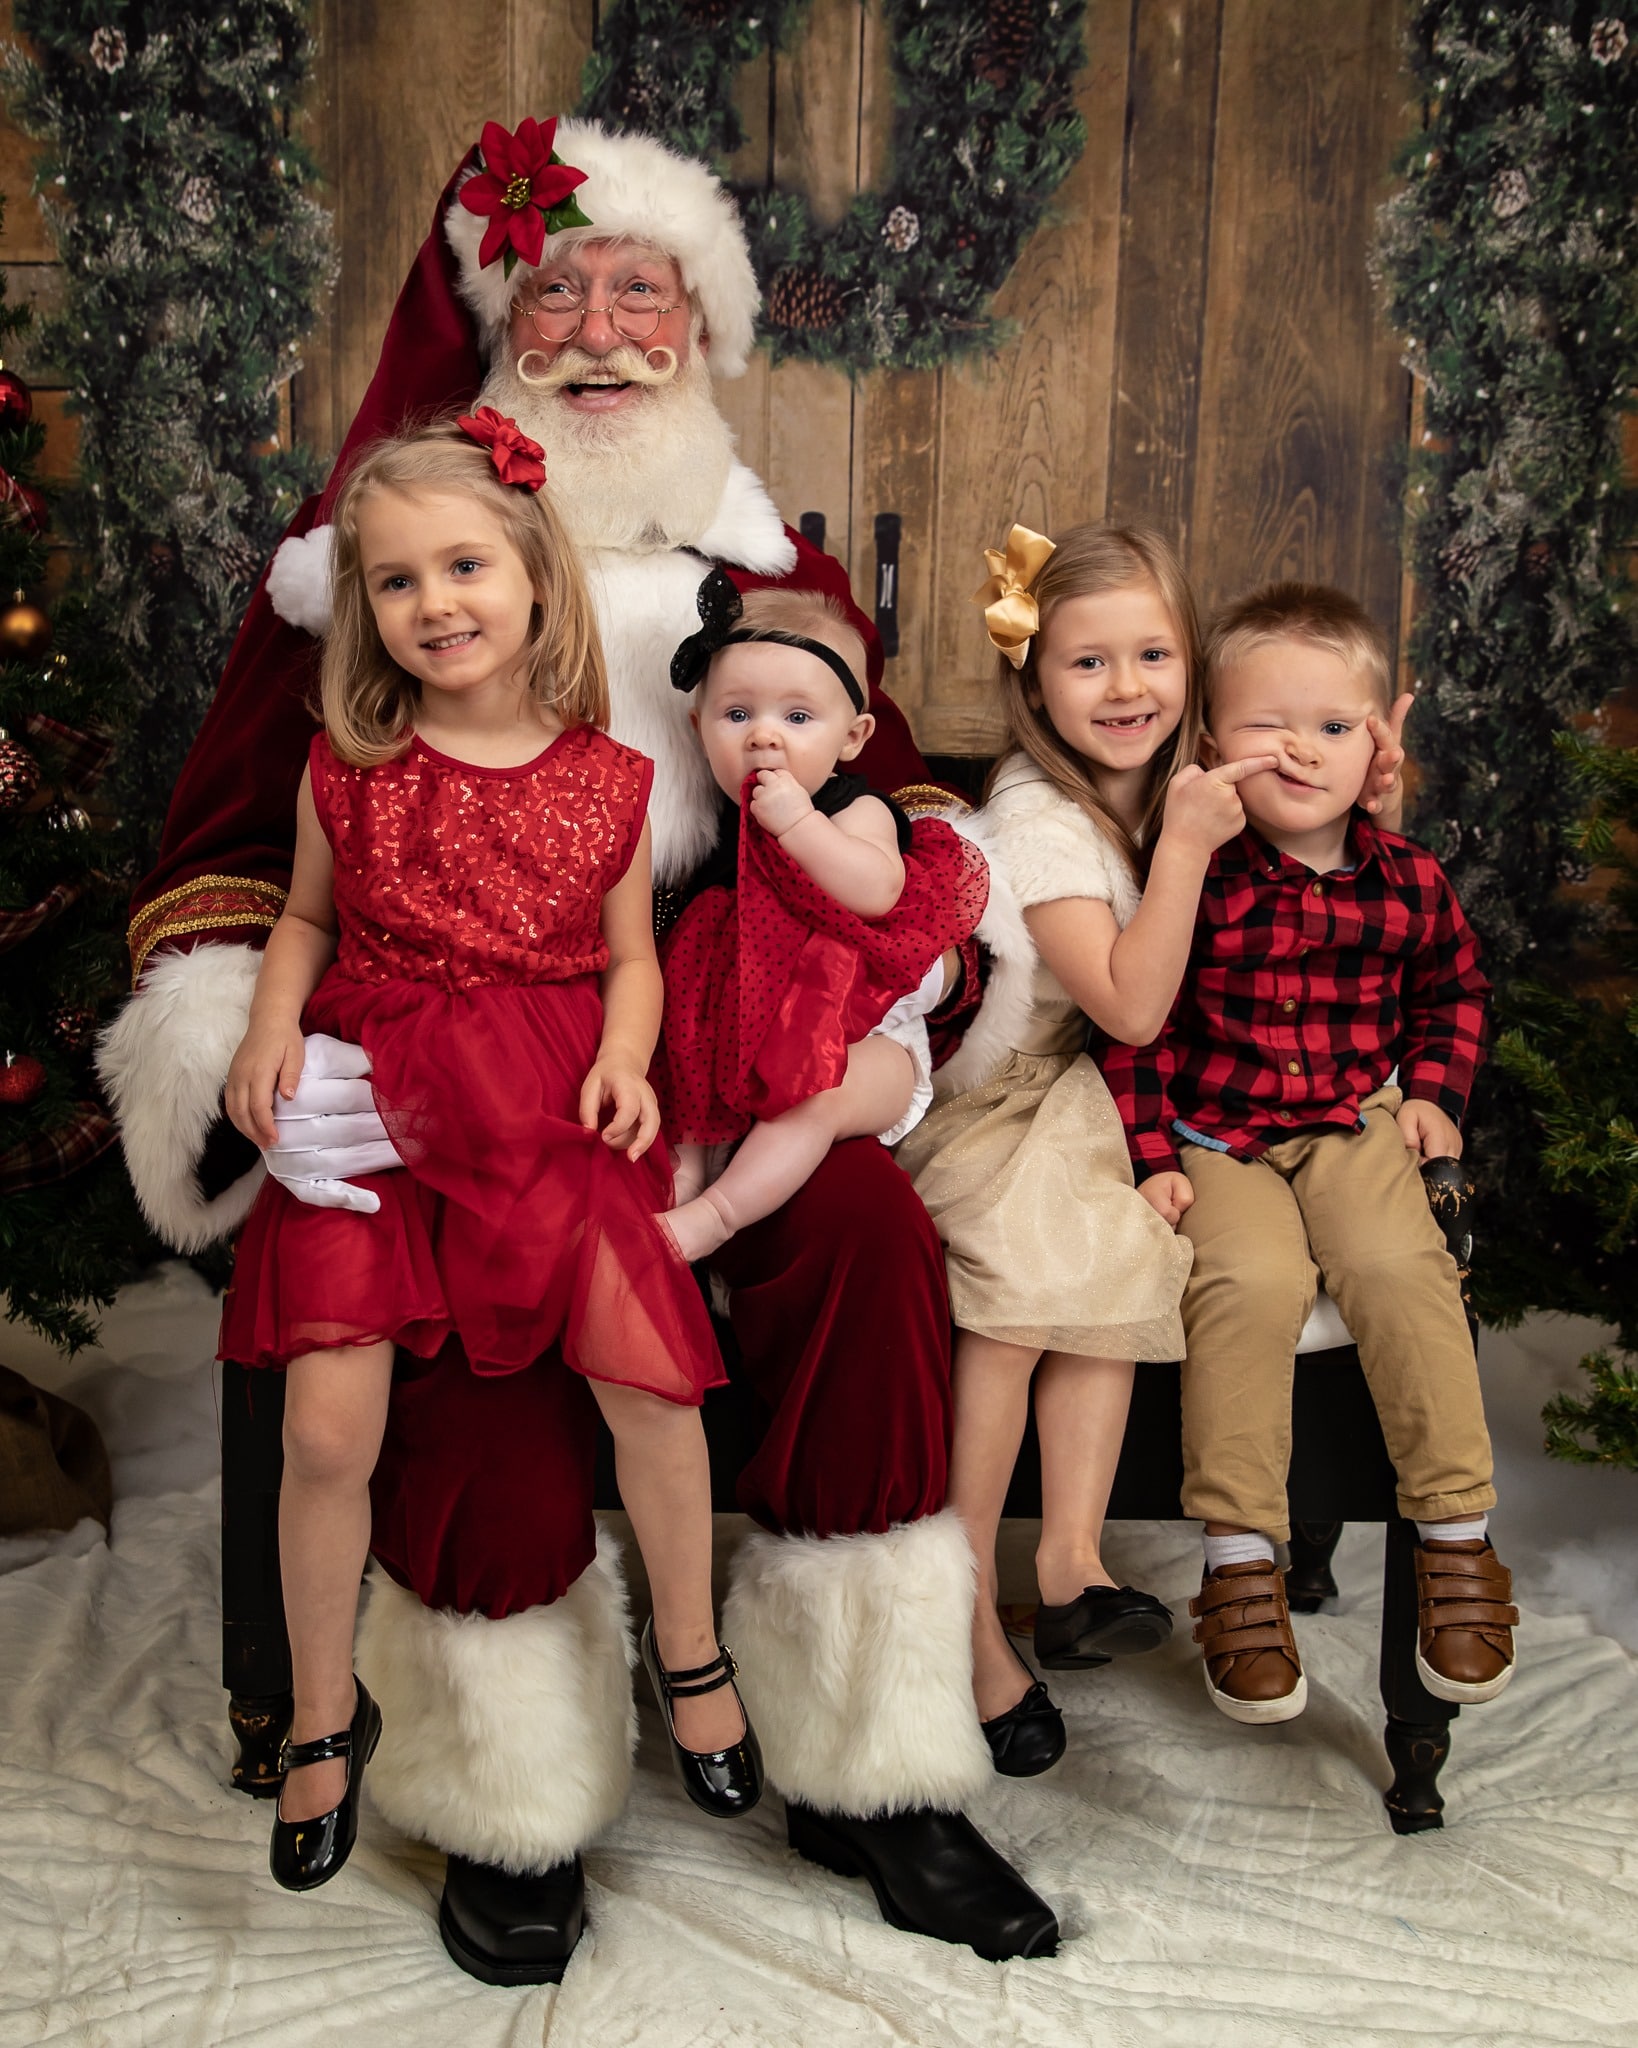 Children's photo with Santa by Art Inspired Images